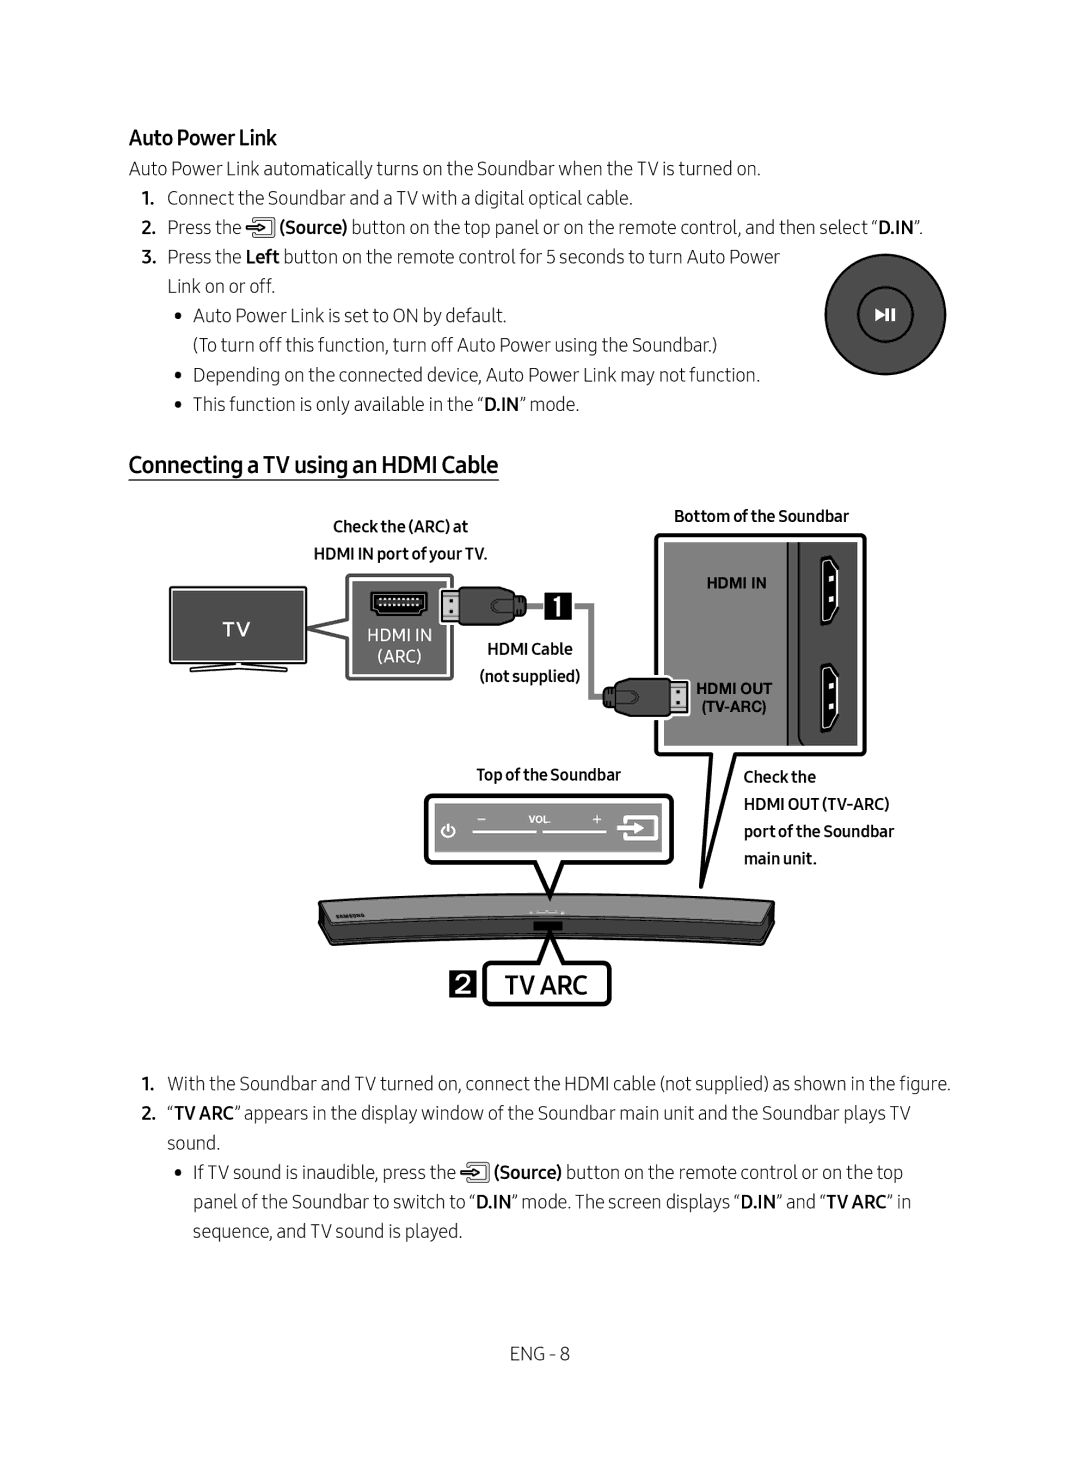 Samsung HW-M4500/ZG manual Connecting a TV using an Hdmi Cable, Auto Power Link, Check the ARC at Hdmi in port of your TV 